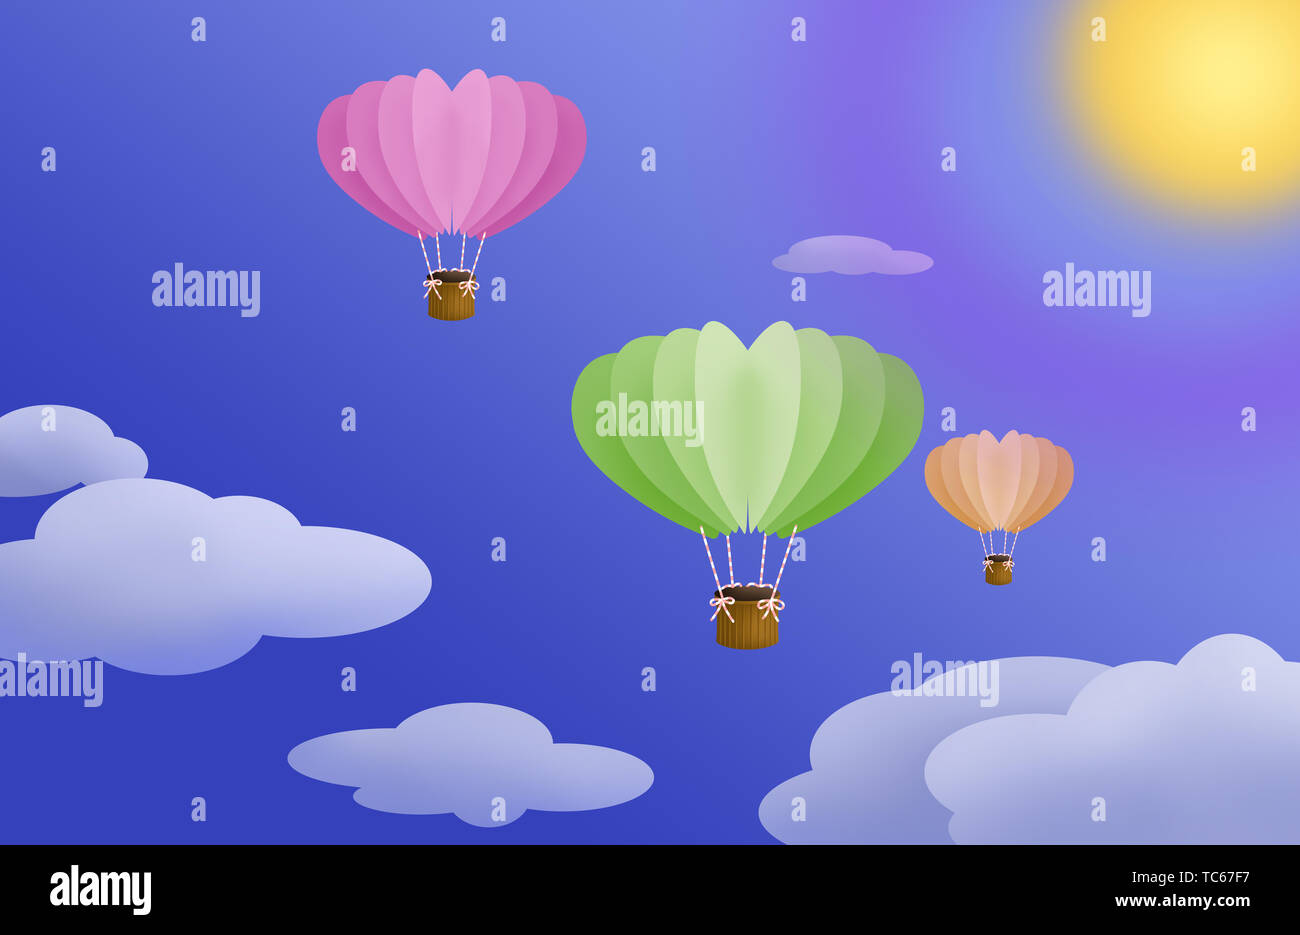 Color hot air balloon illustration in the sky Stock Photo